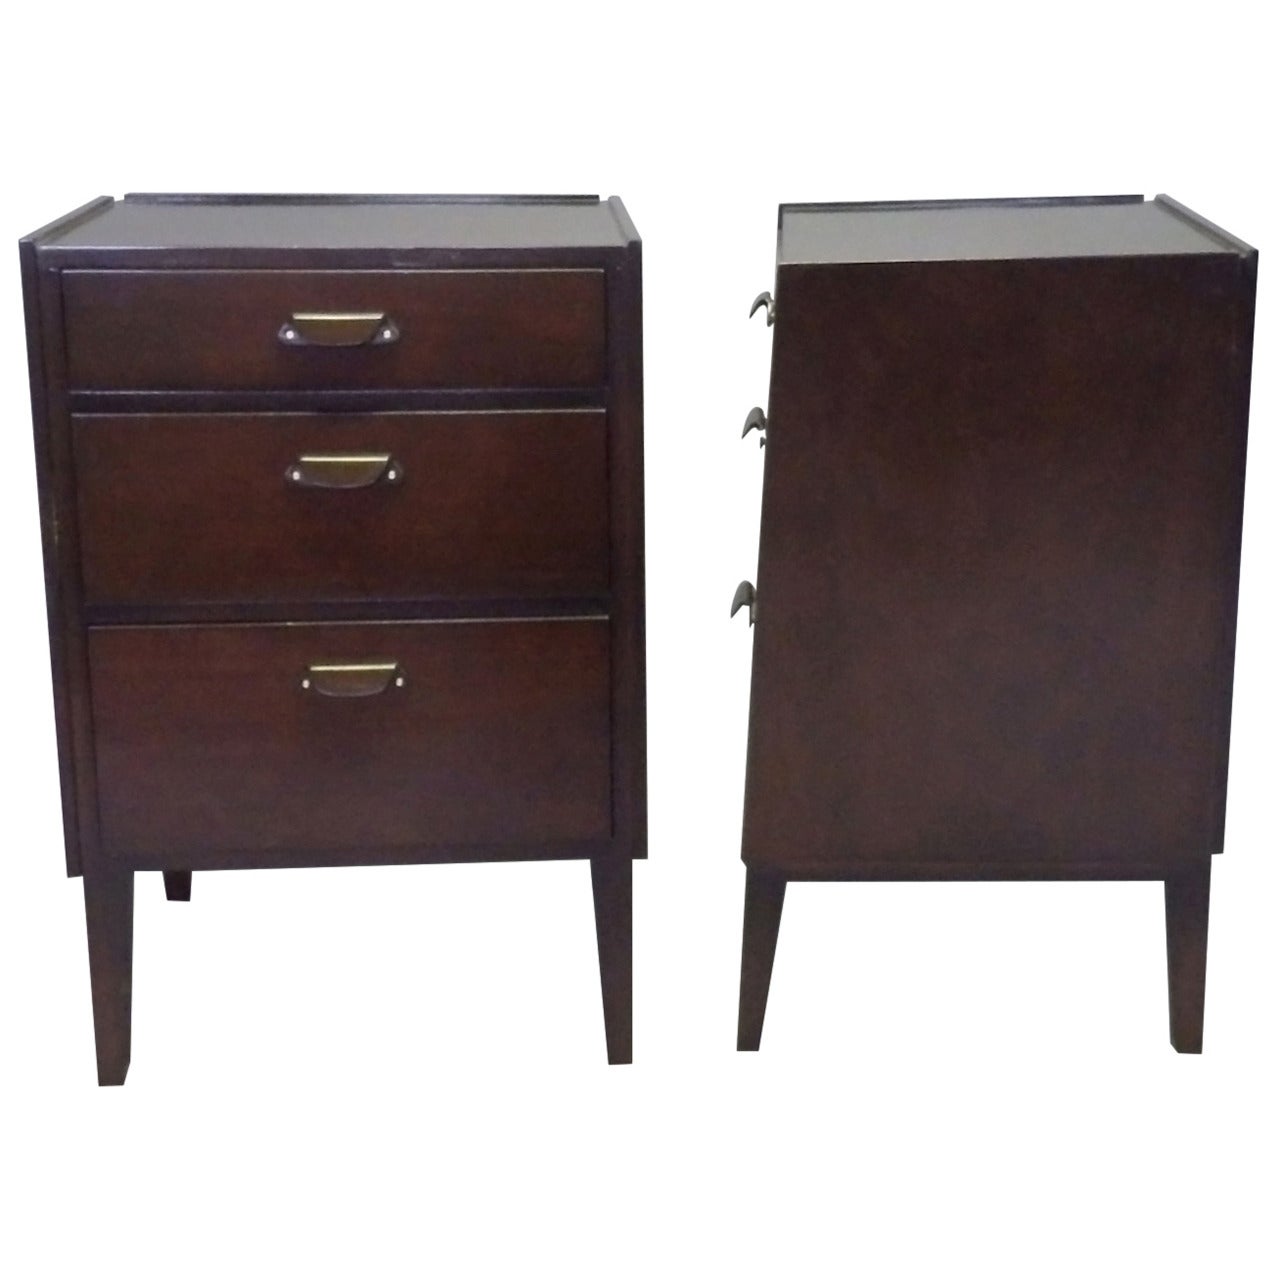 Pair of Edward Wormley for Dunbar Angle Front Nightstands